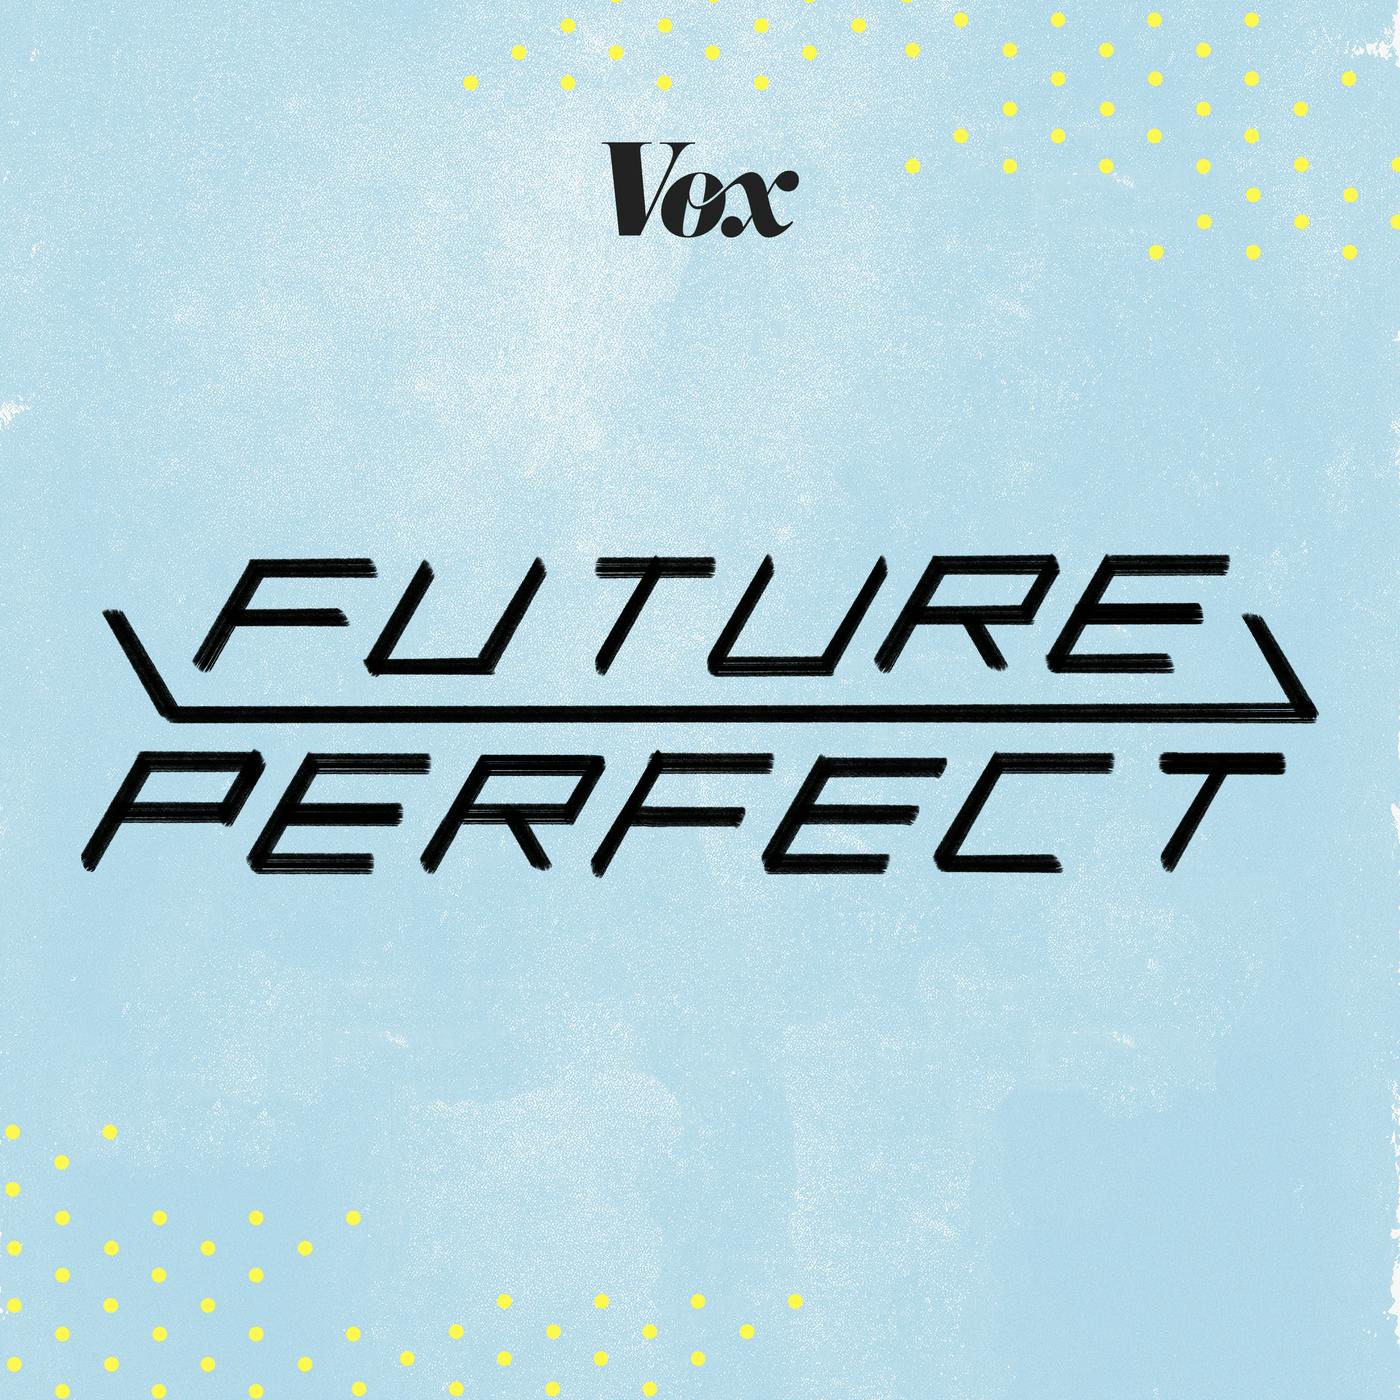 Introducing Future Perfect